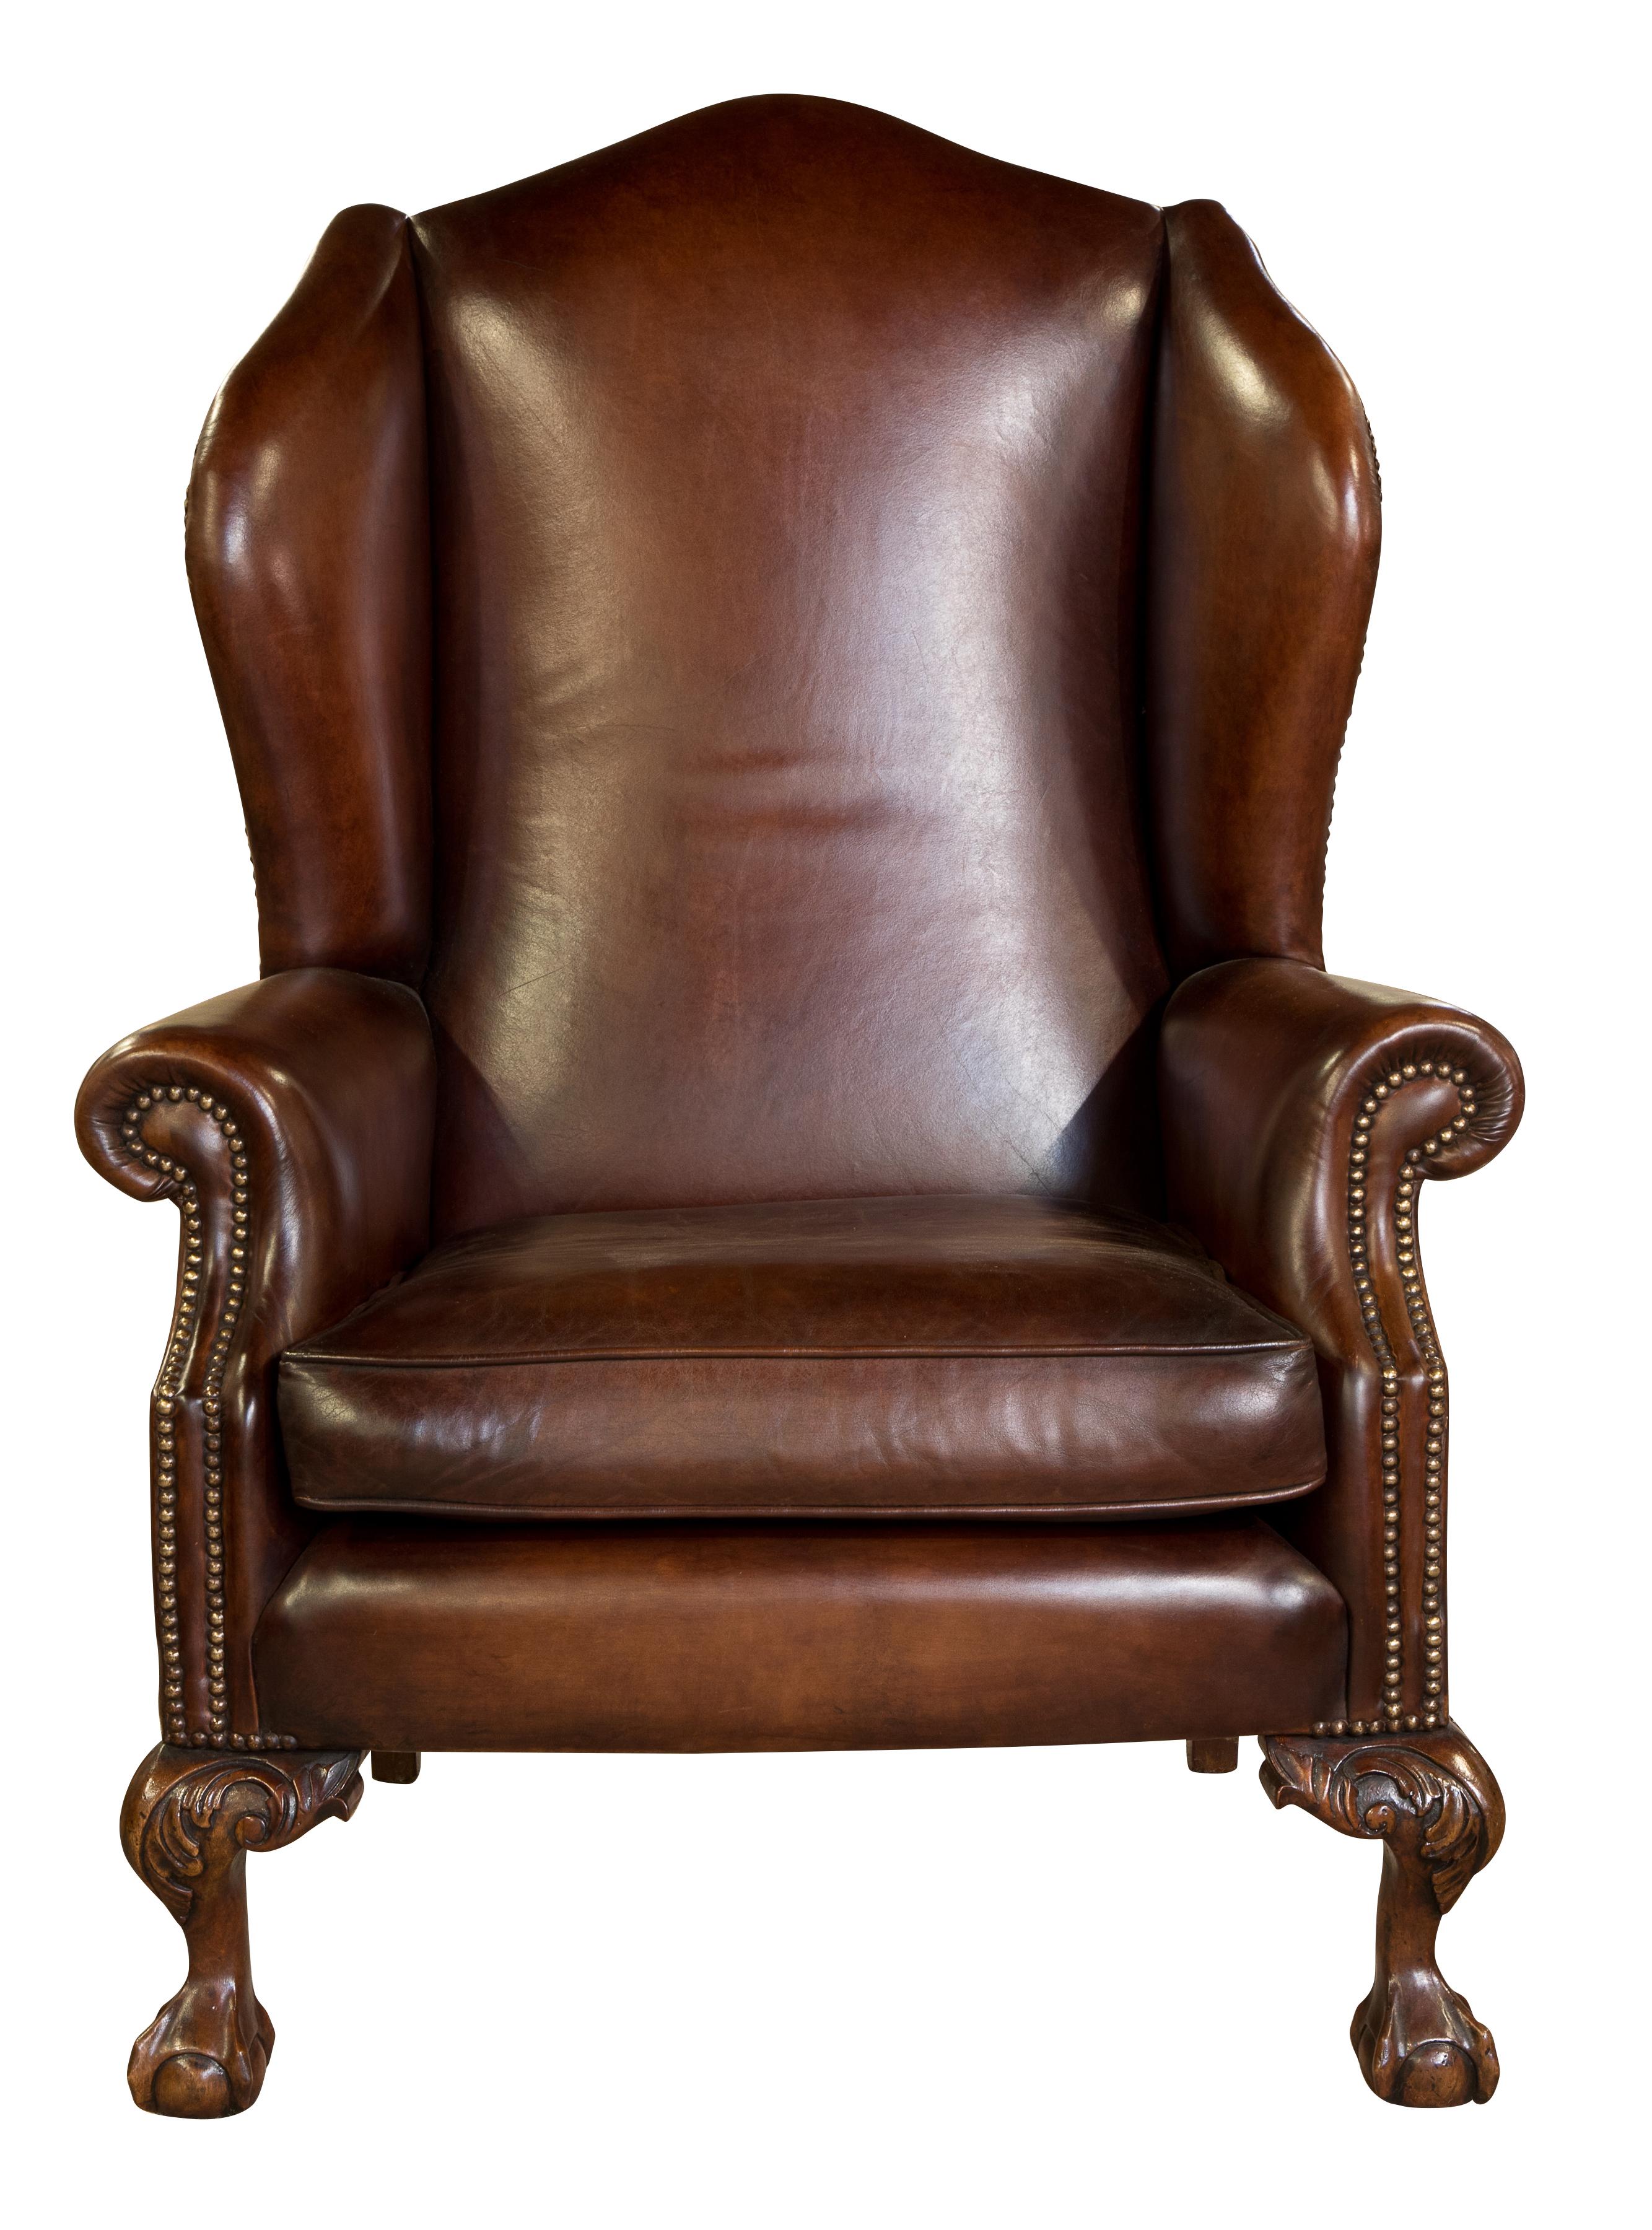 Brown leather wing chair on ball and claw legs, circa 1960.